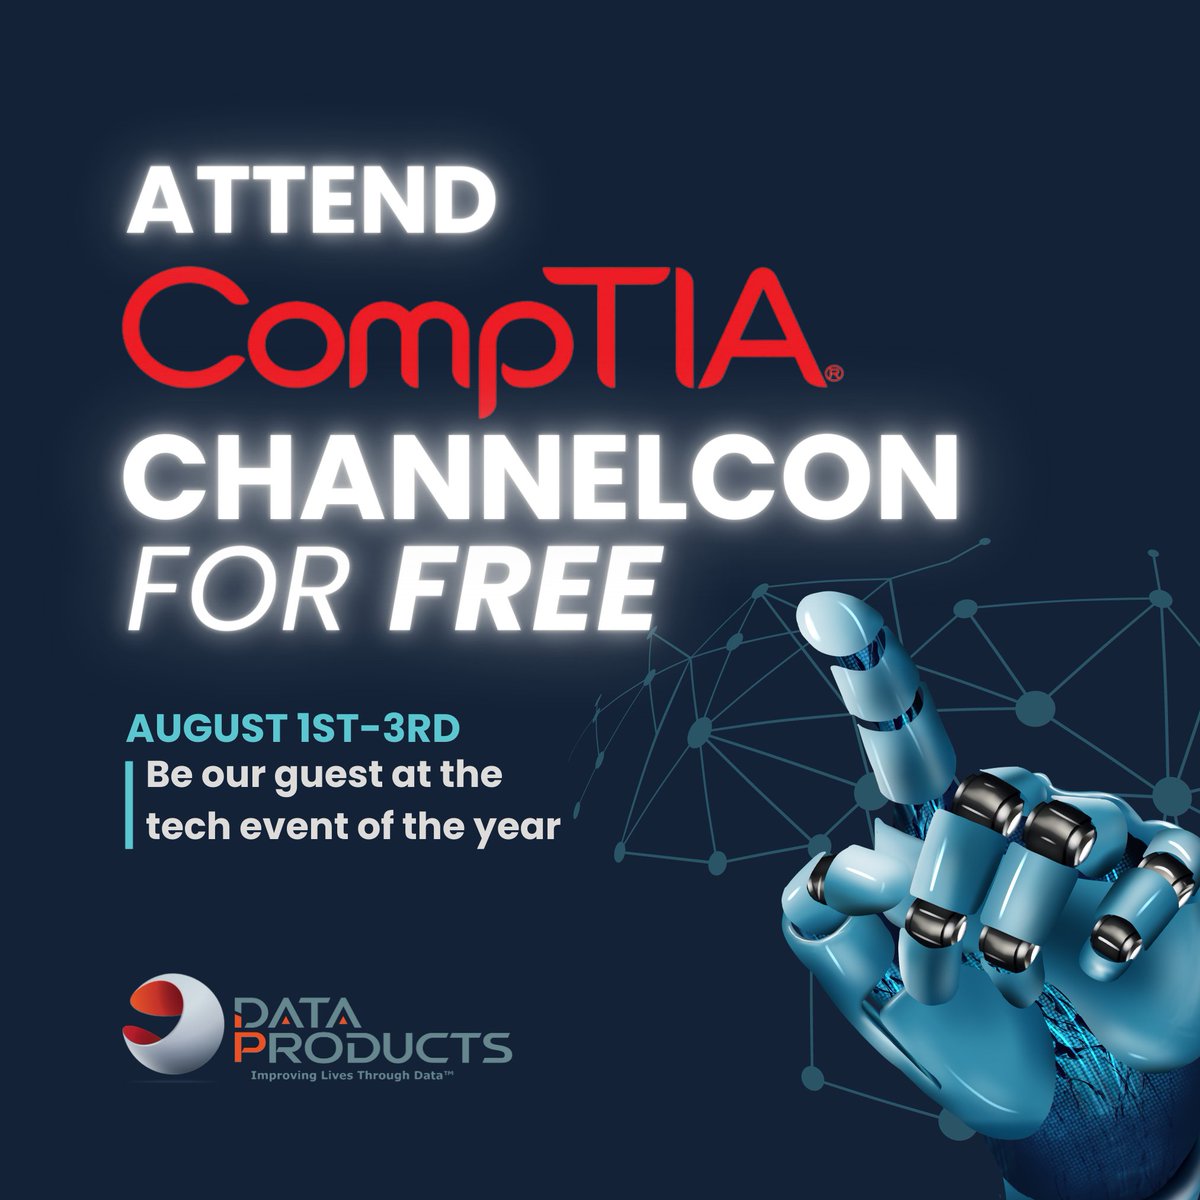 You're going to ChannelCon for FREE - on us!

Click on the link below, enter your email, and we'll send over your free ticket!

dataproducts.io/event/channelc…

#channelcon2023 #channelcon #comptia #comptiacommunity #cdo #cto #csuite #aievent #dataevent #freeevent #freetickets